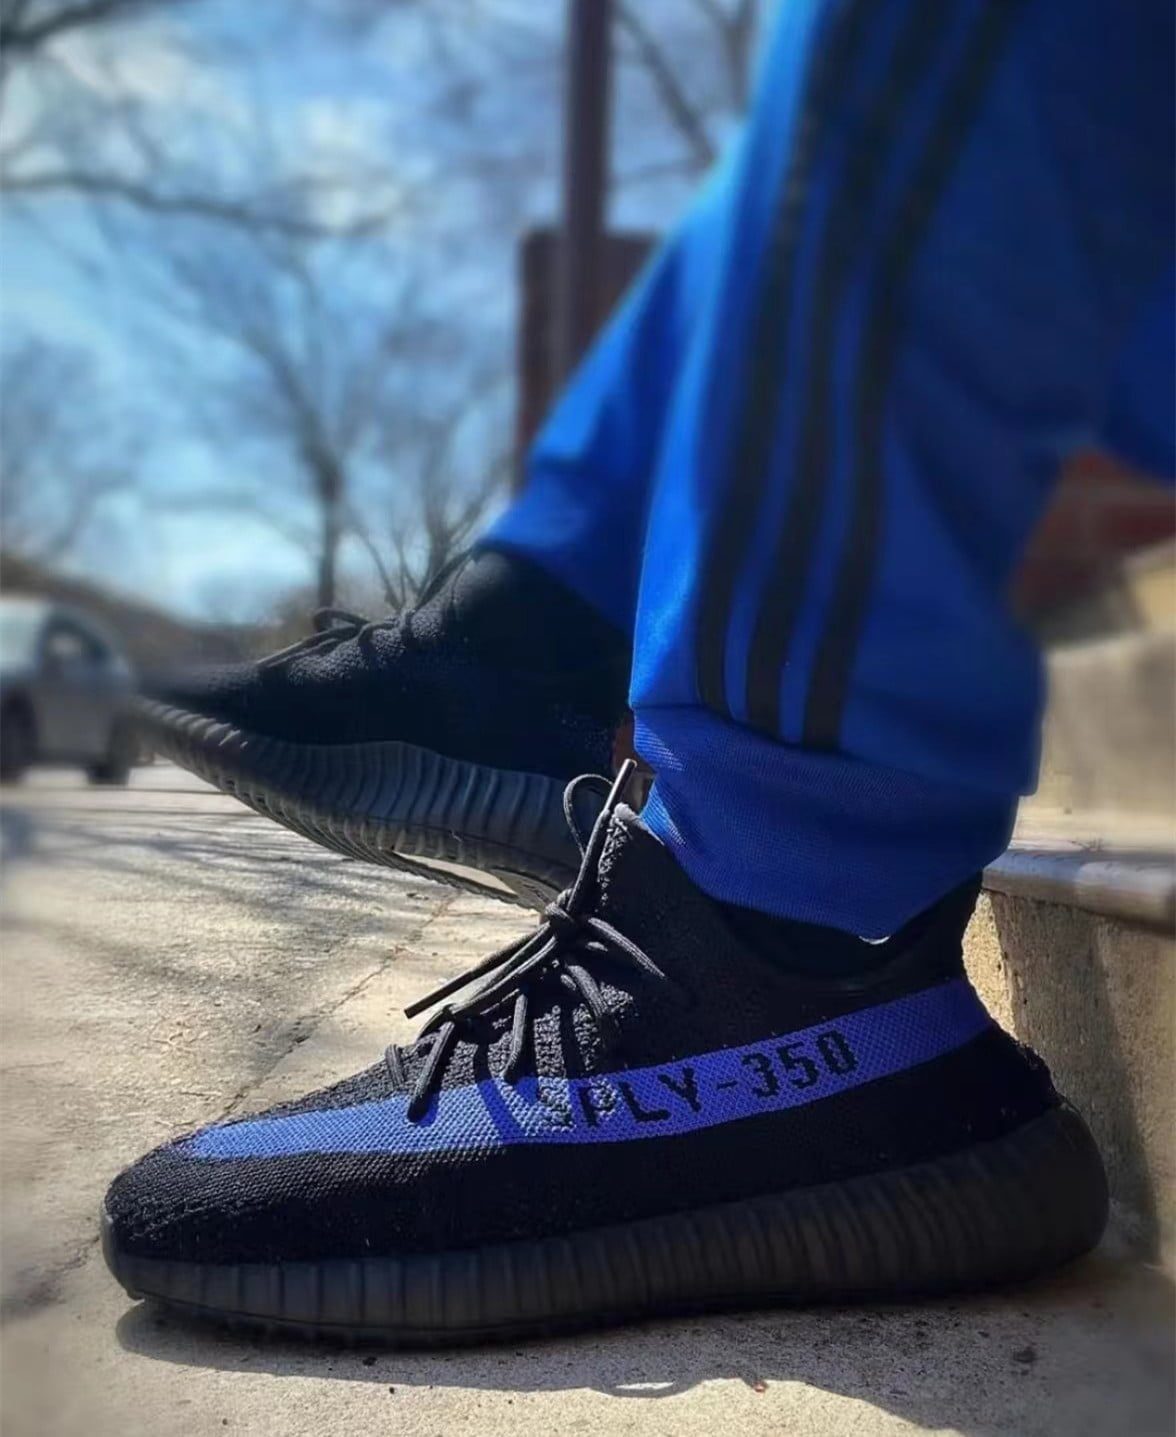 Yeezy Boost 350 V2 'Dazzling Blue' photo review